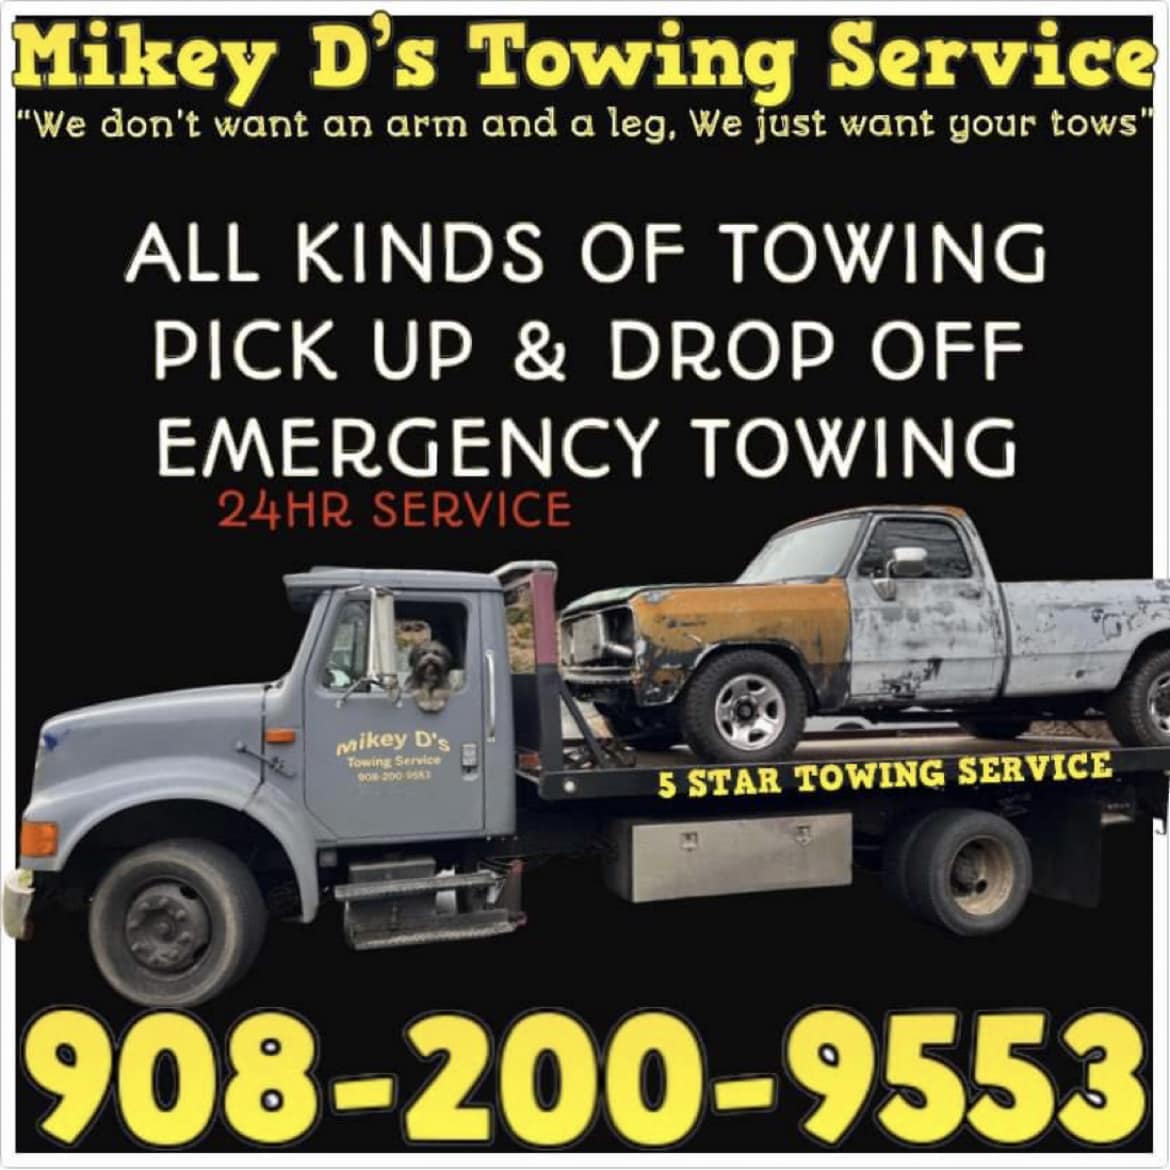 Mikey D’s Towing Service